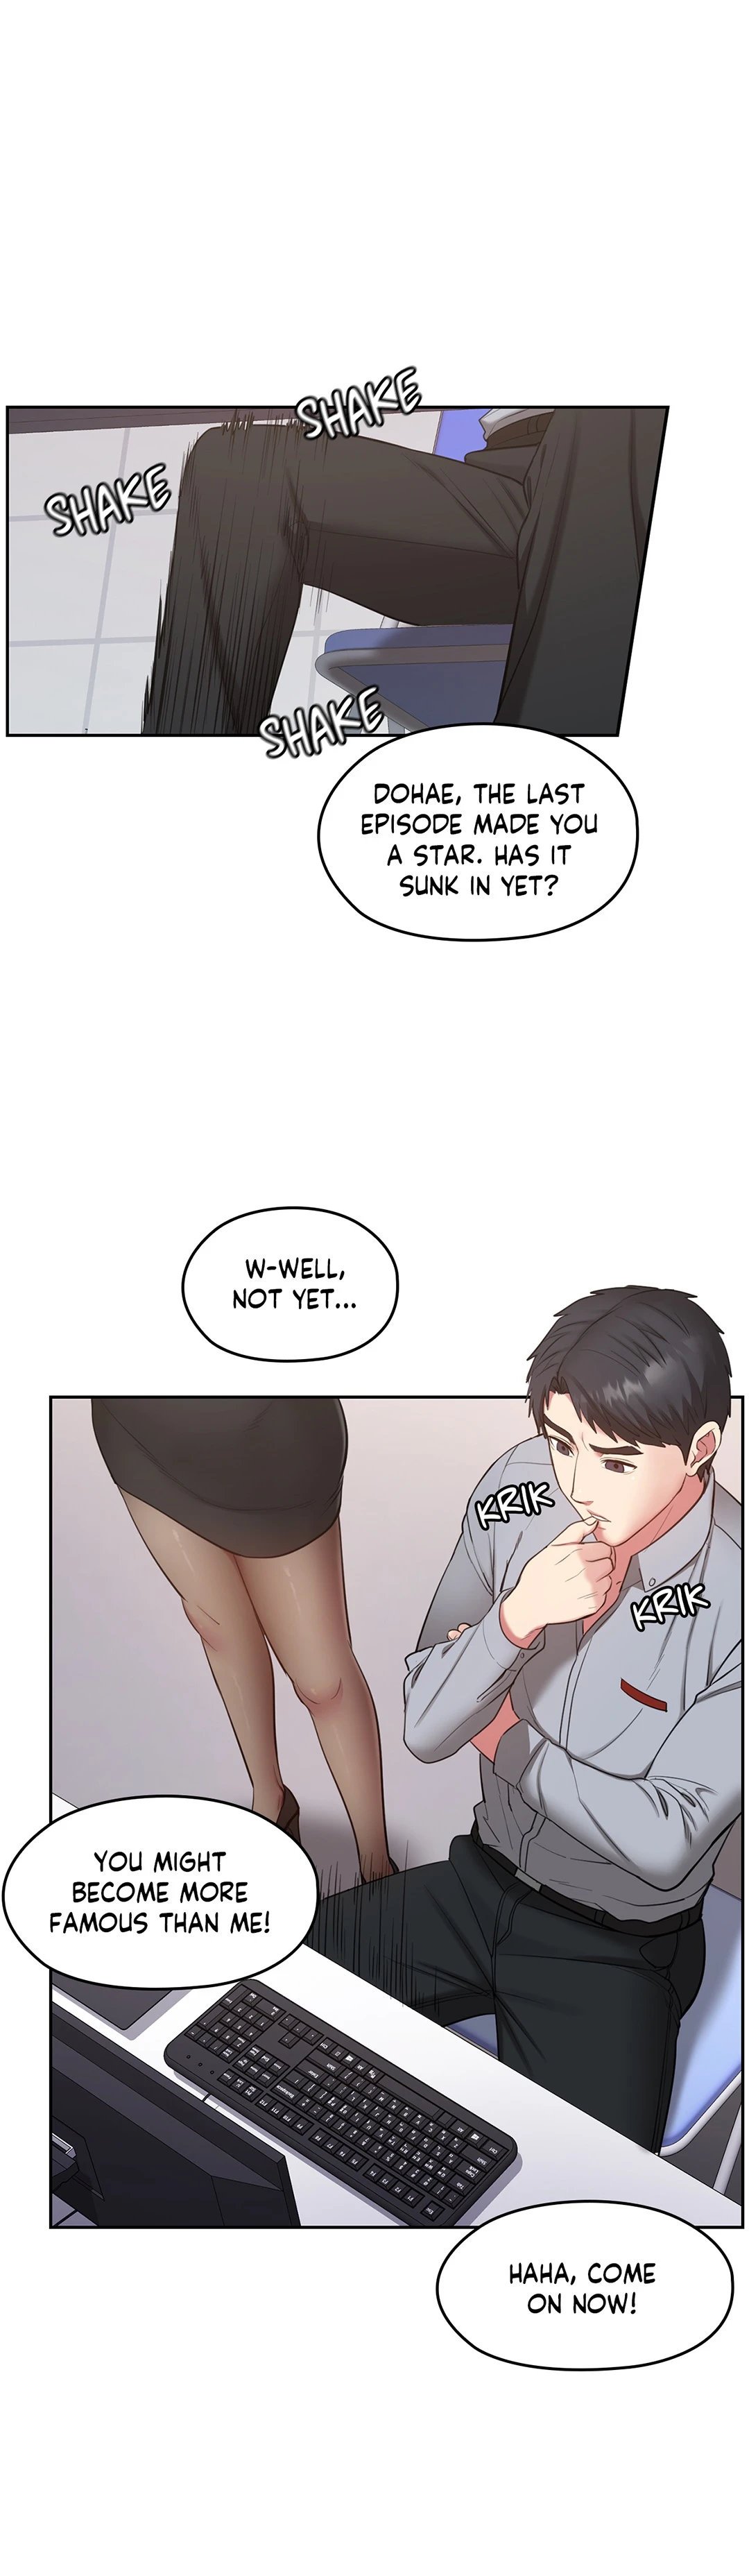 sexual-consulting-chap-34-20